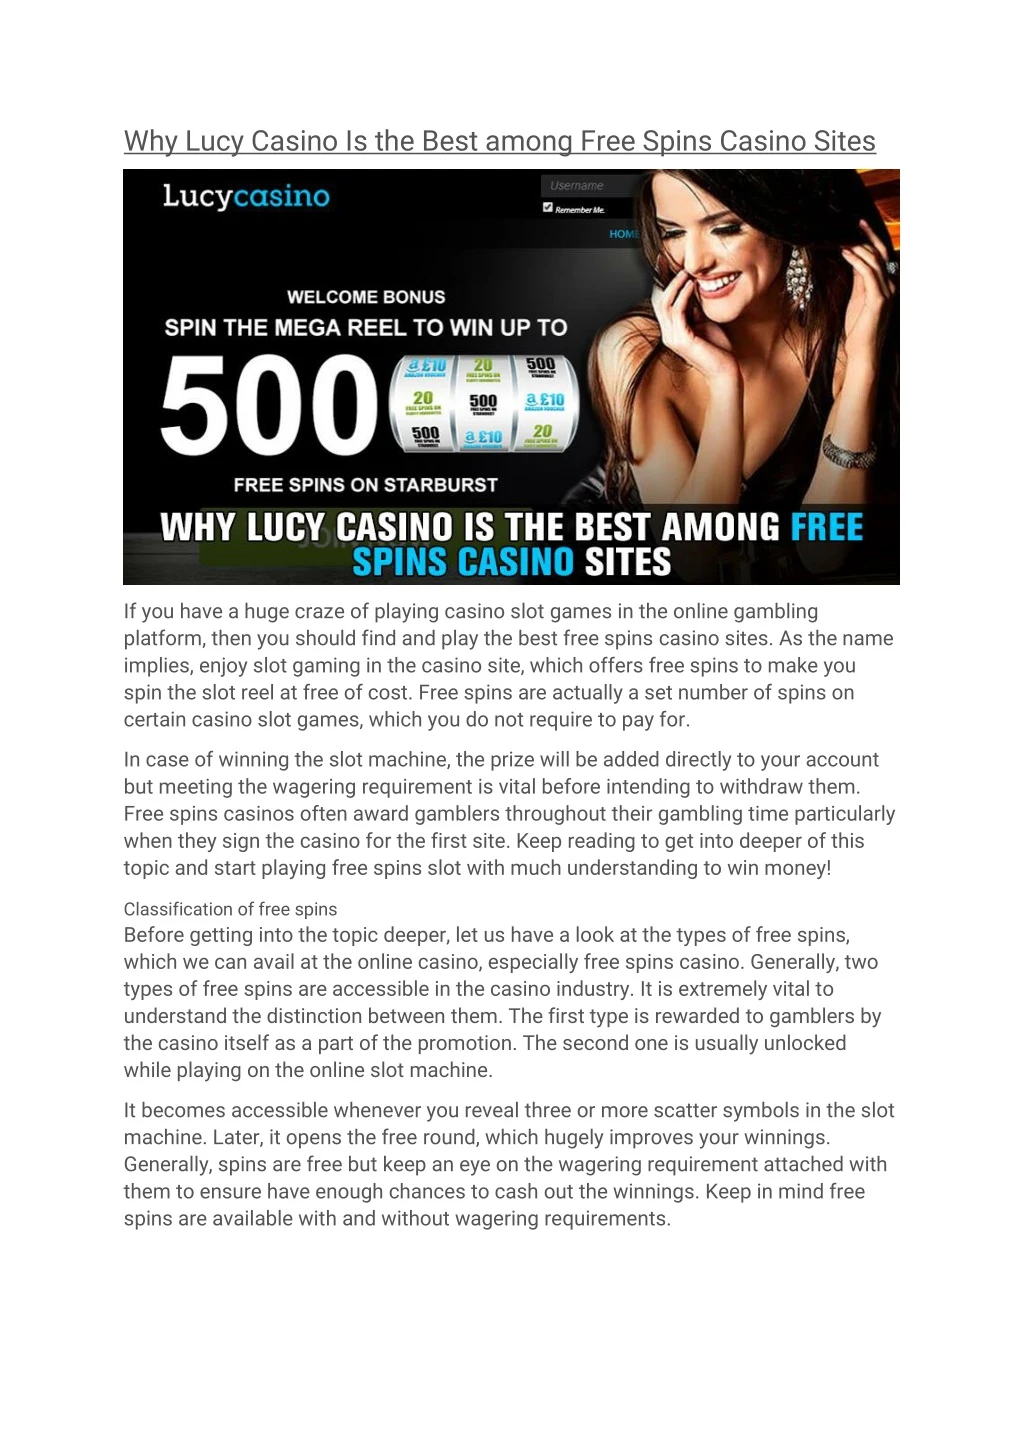 why lucy casino is the best among free spins